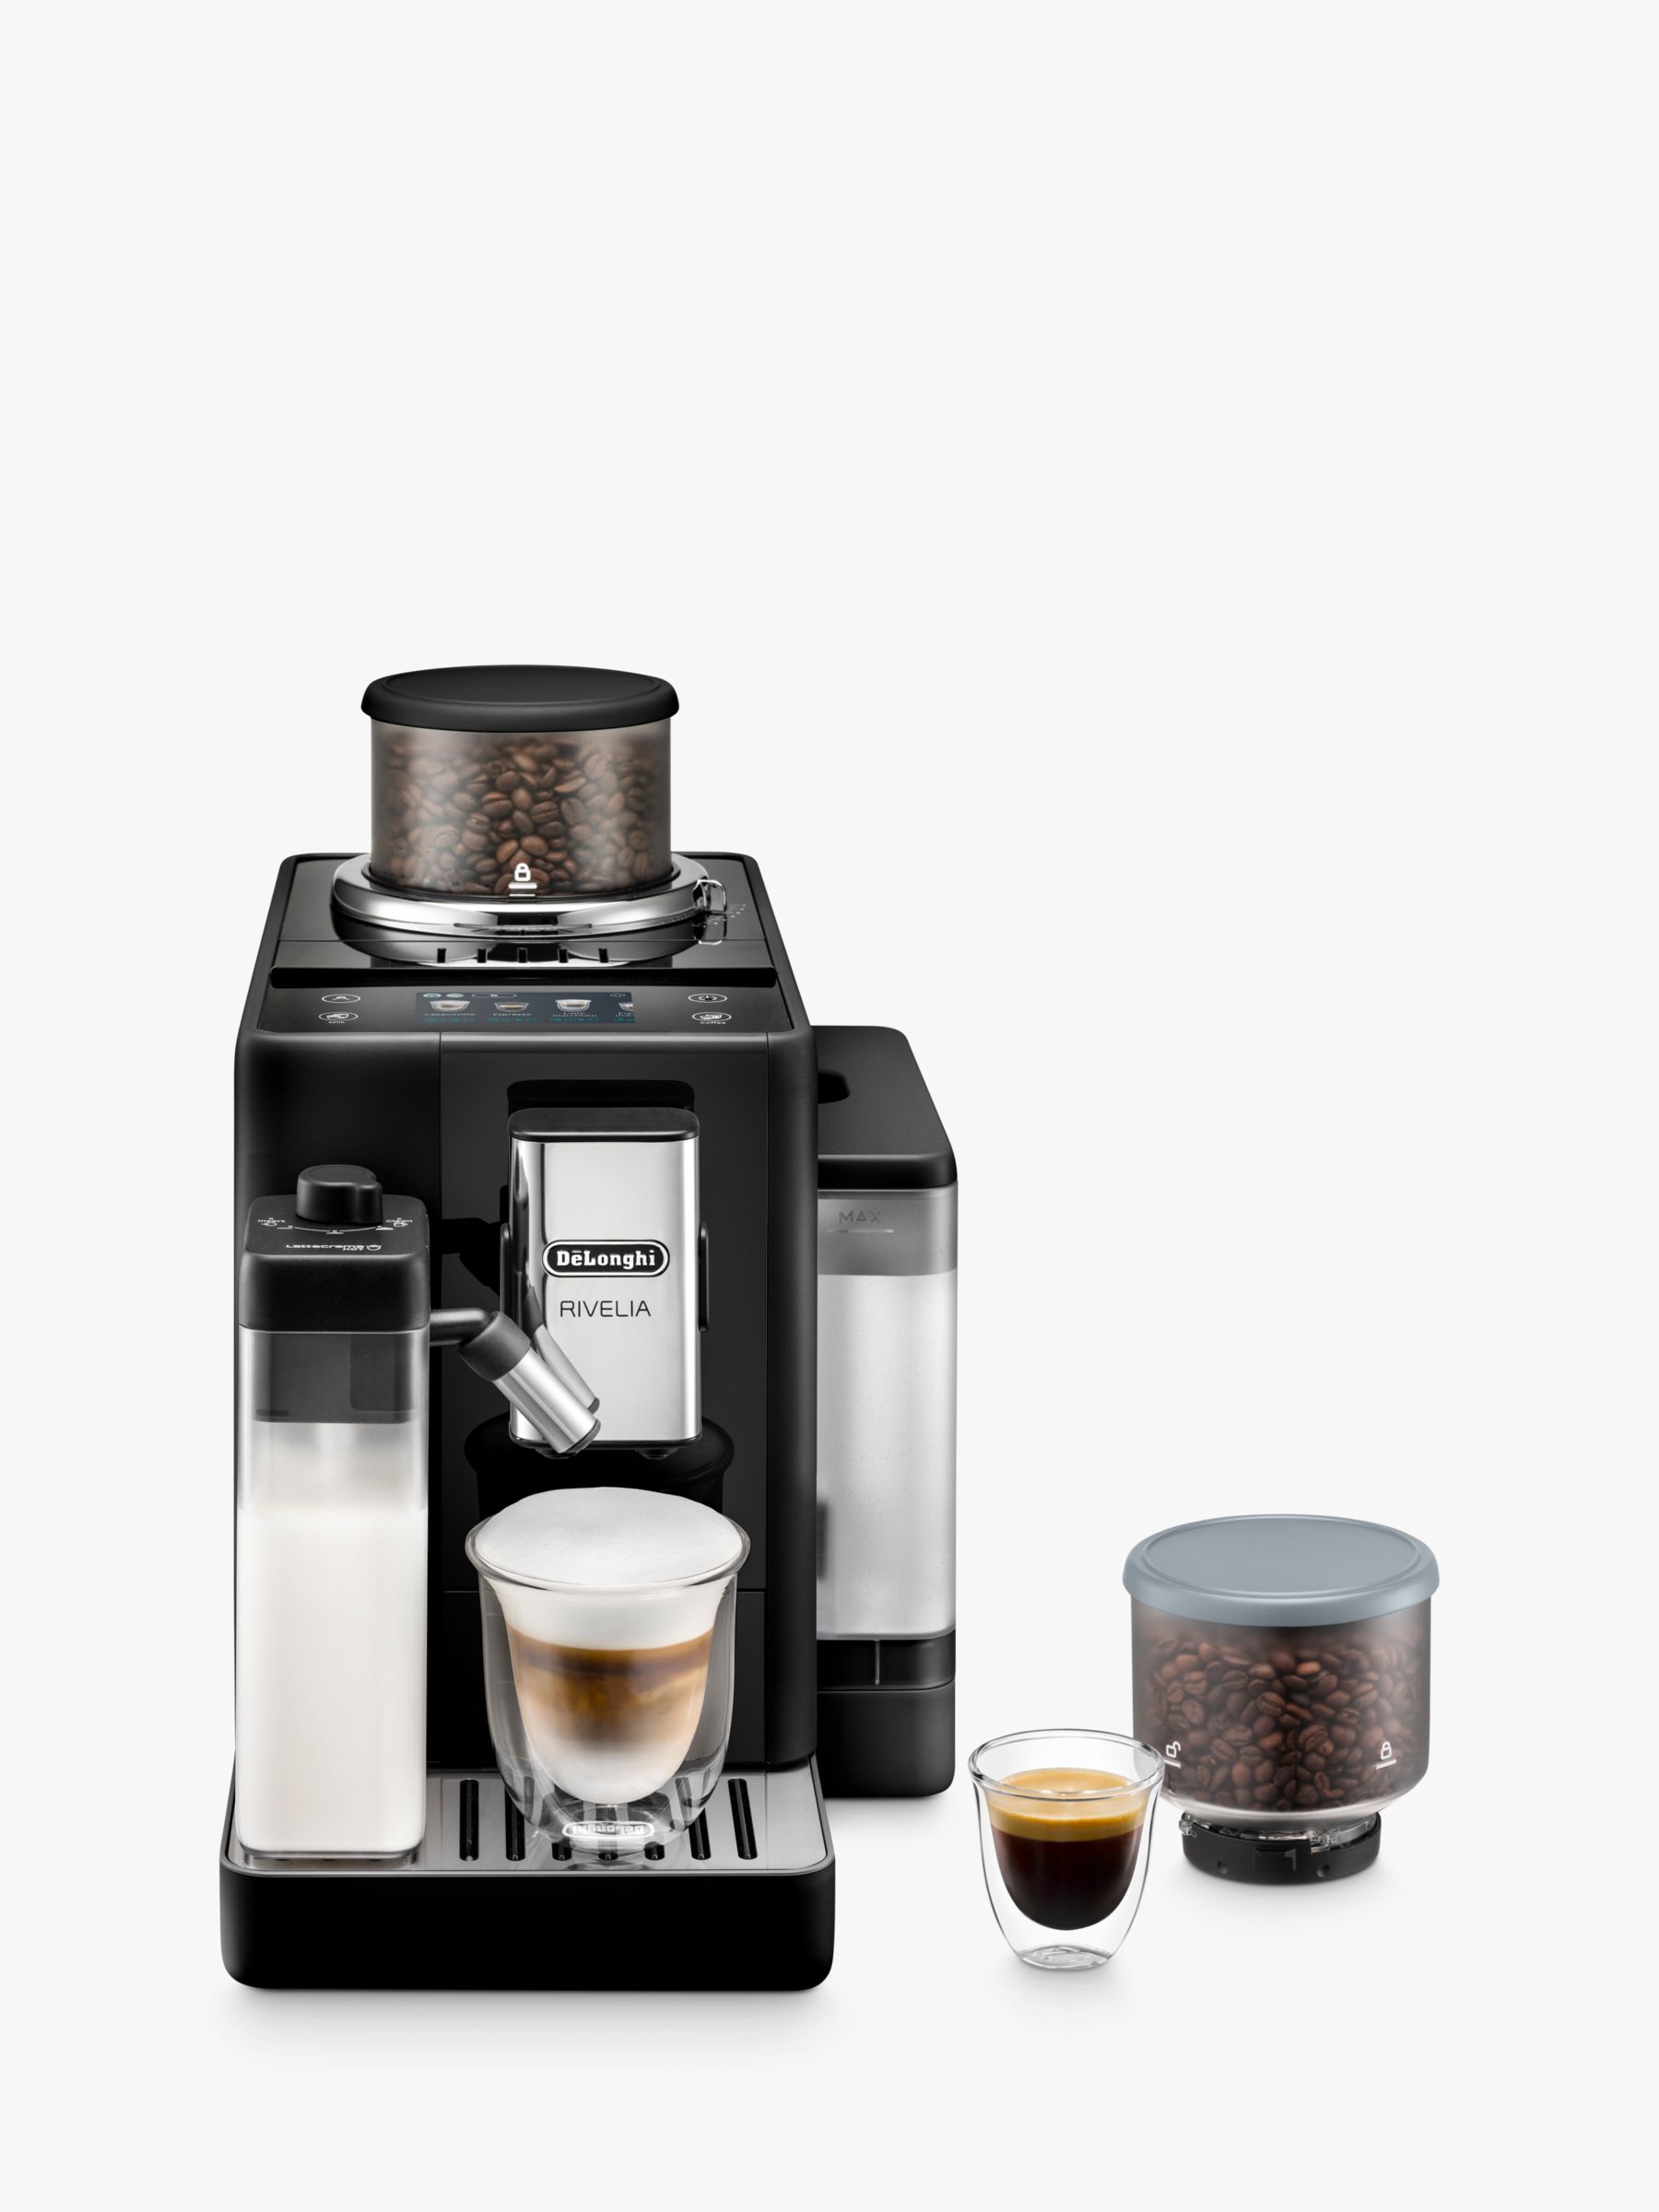 De'Longhi Rivelia review: is the bean-to-cup their best machine yet?